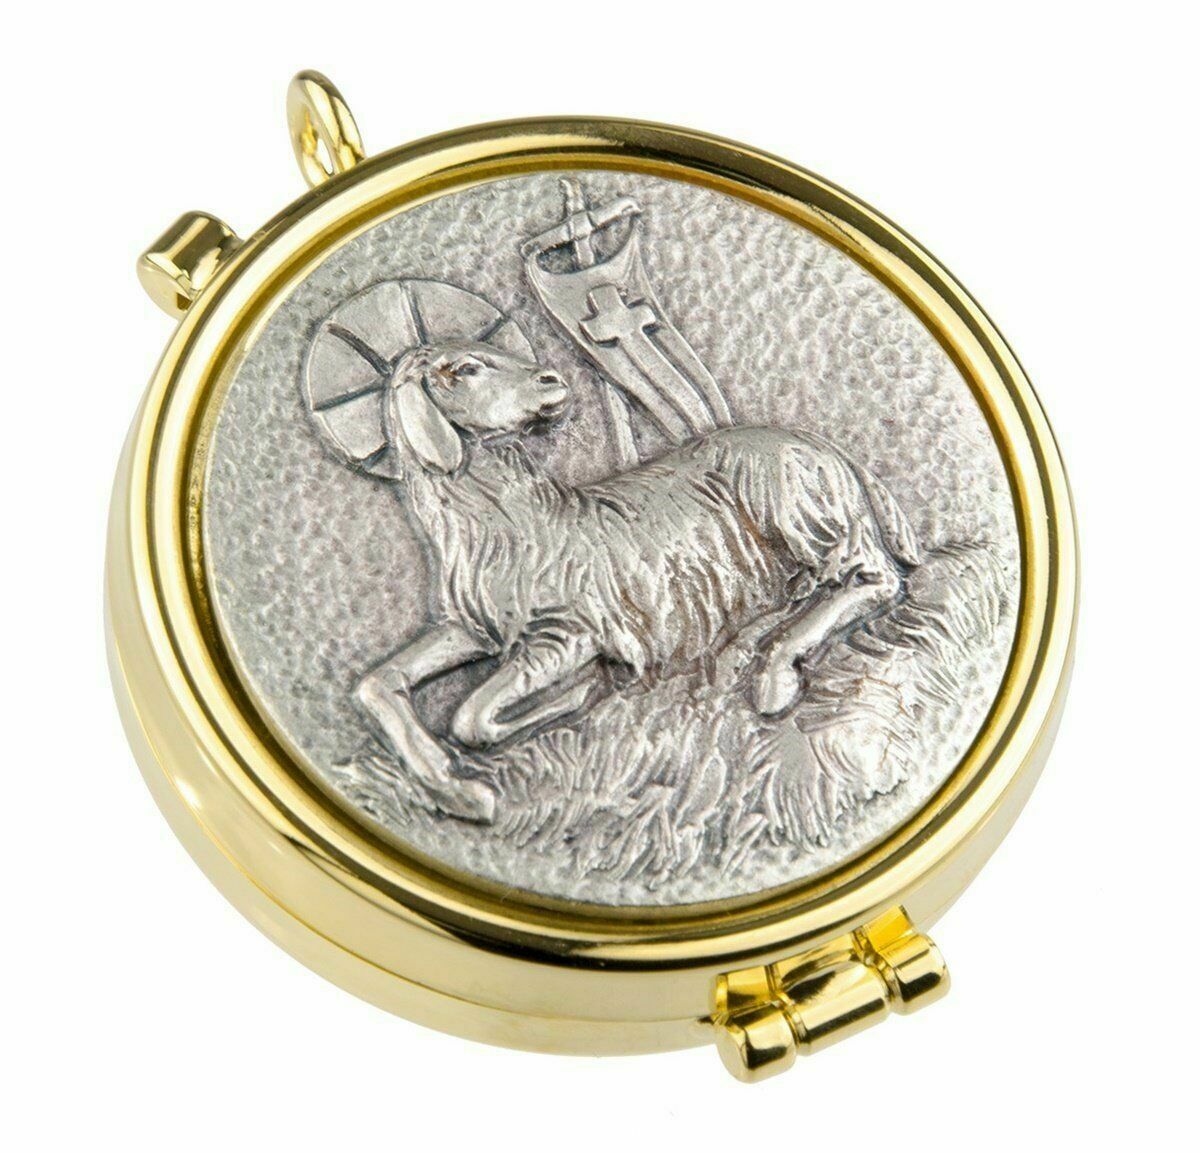 Gold Plate And Silver Toned Lamb Of God Communion Pyx, 2 1/8 Inch